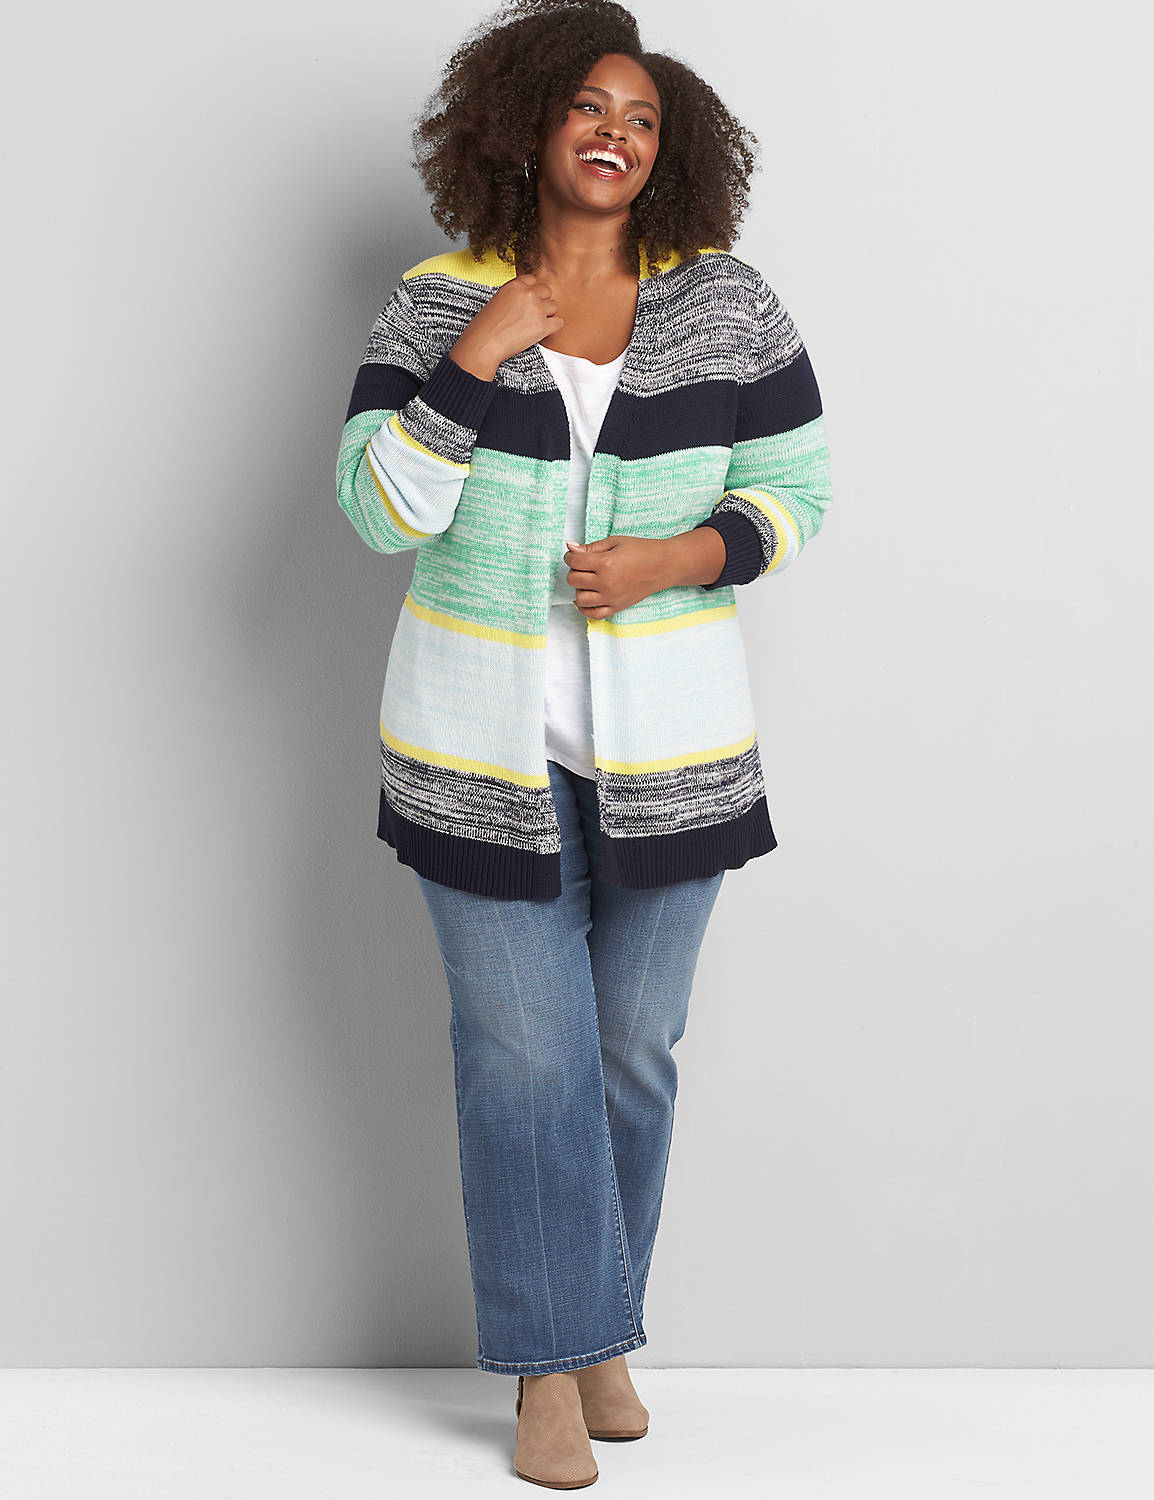 Long Sleeve Clean Front Cardigan with Tie and Colorblock 1118484:Multi:14/16 Product Image 3